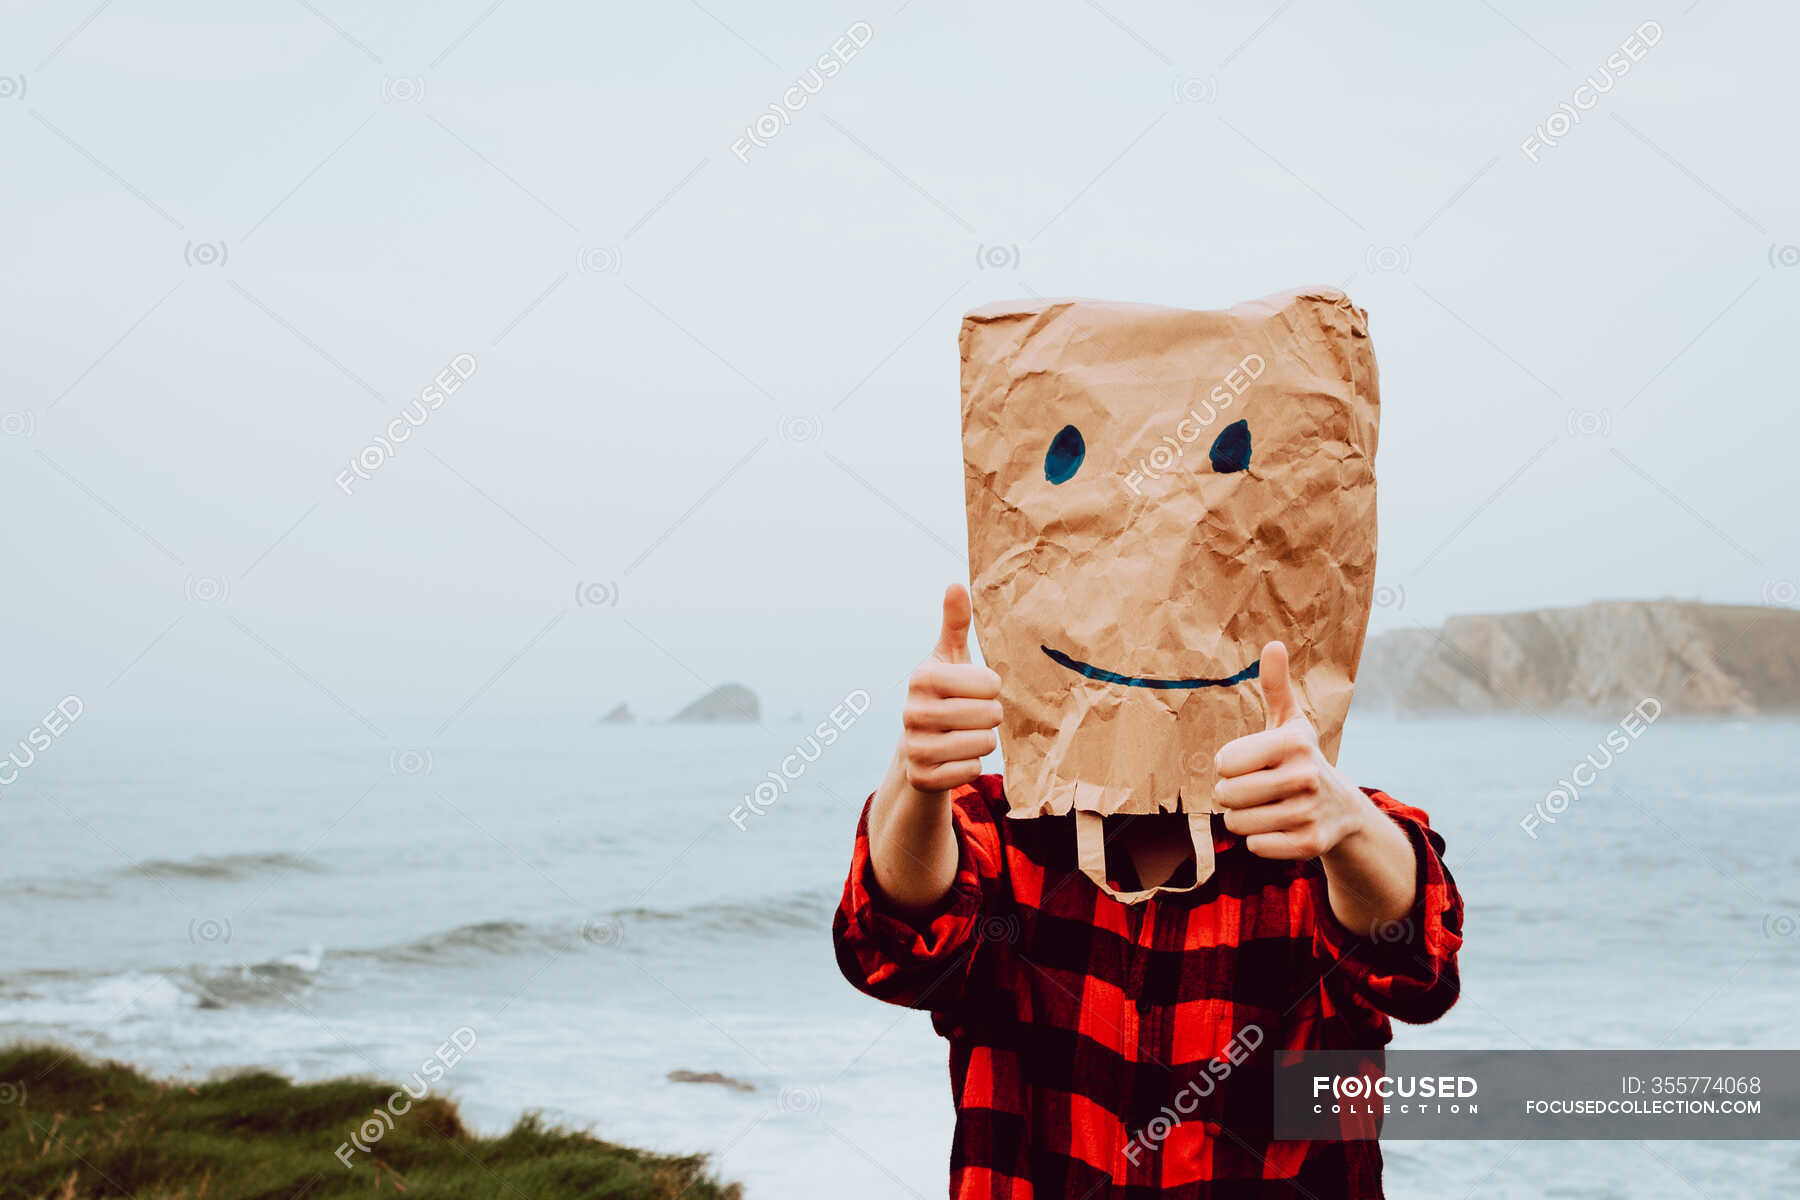 Facet complexity Go up Person with paper bag on head pointing at camera — plastic, environment -  Stock Photo | #355774068